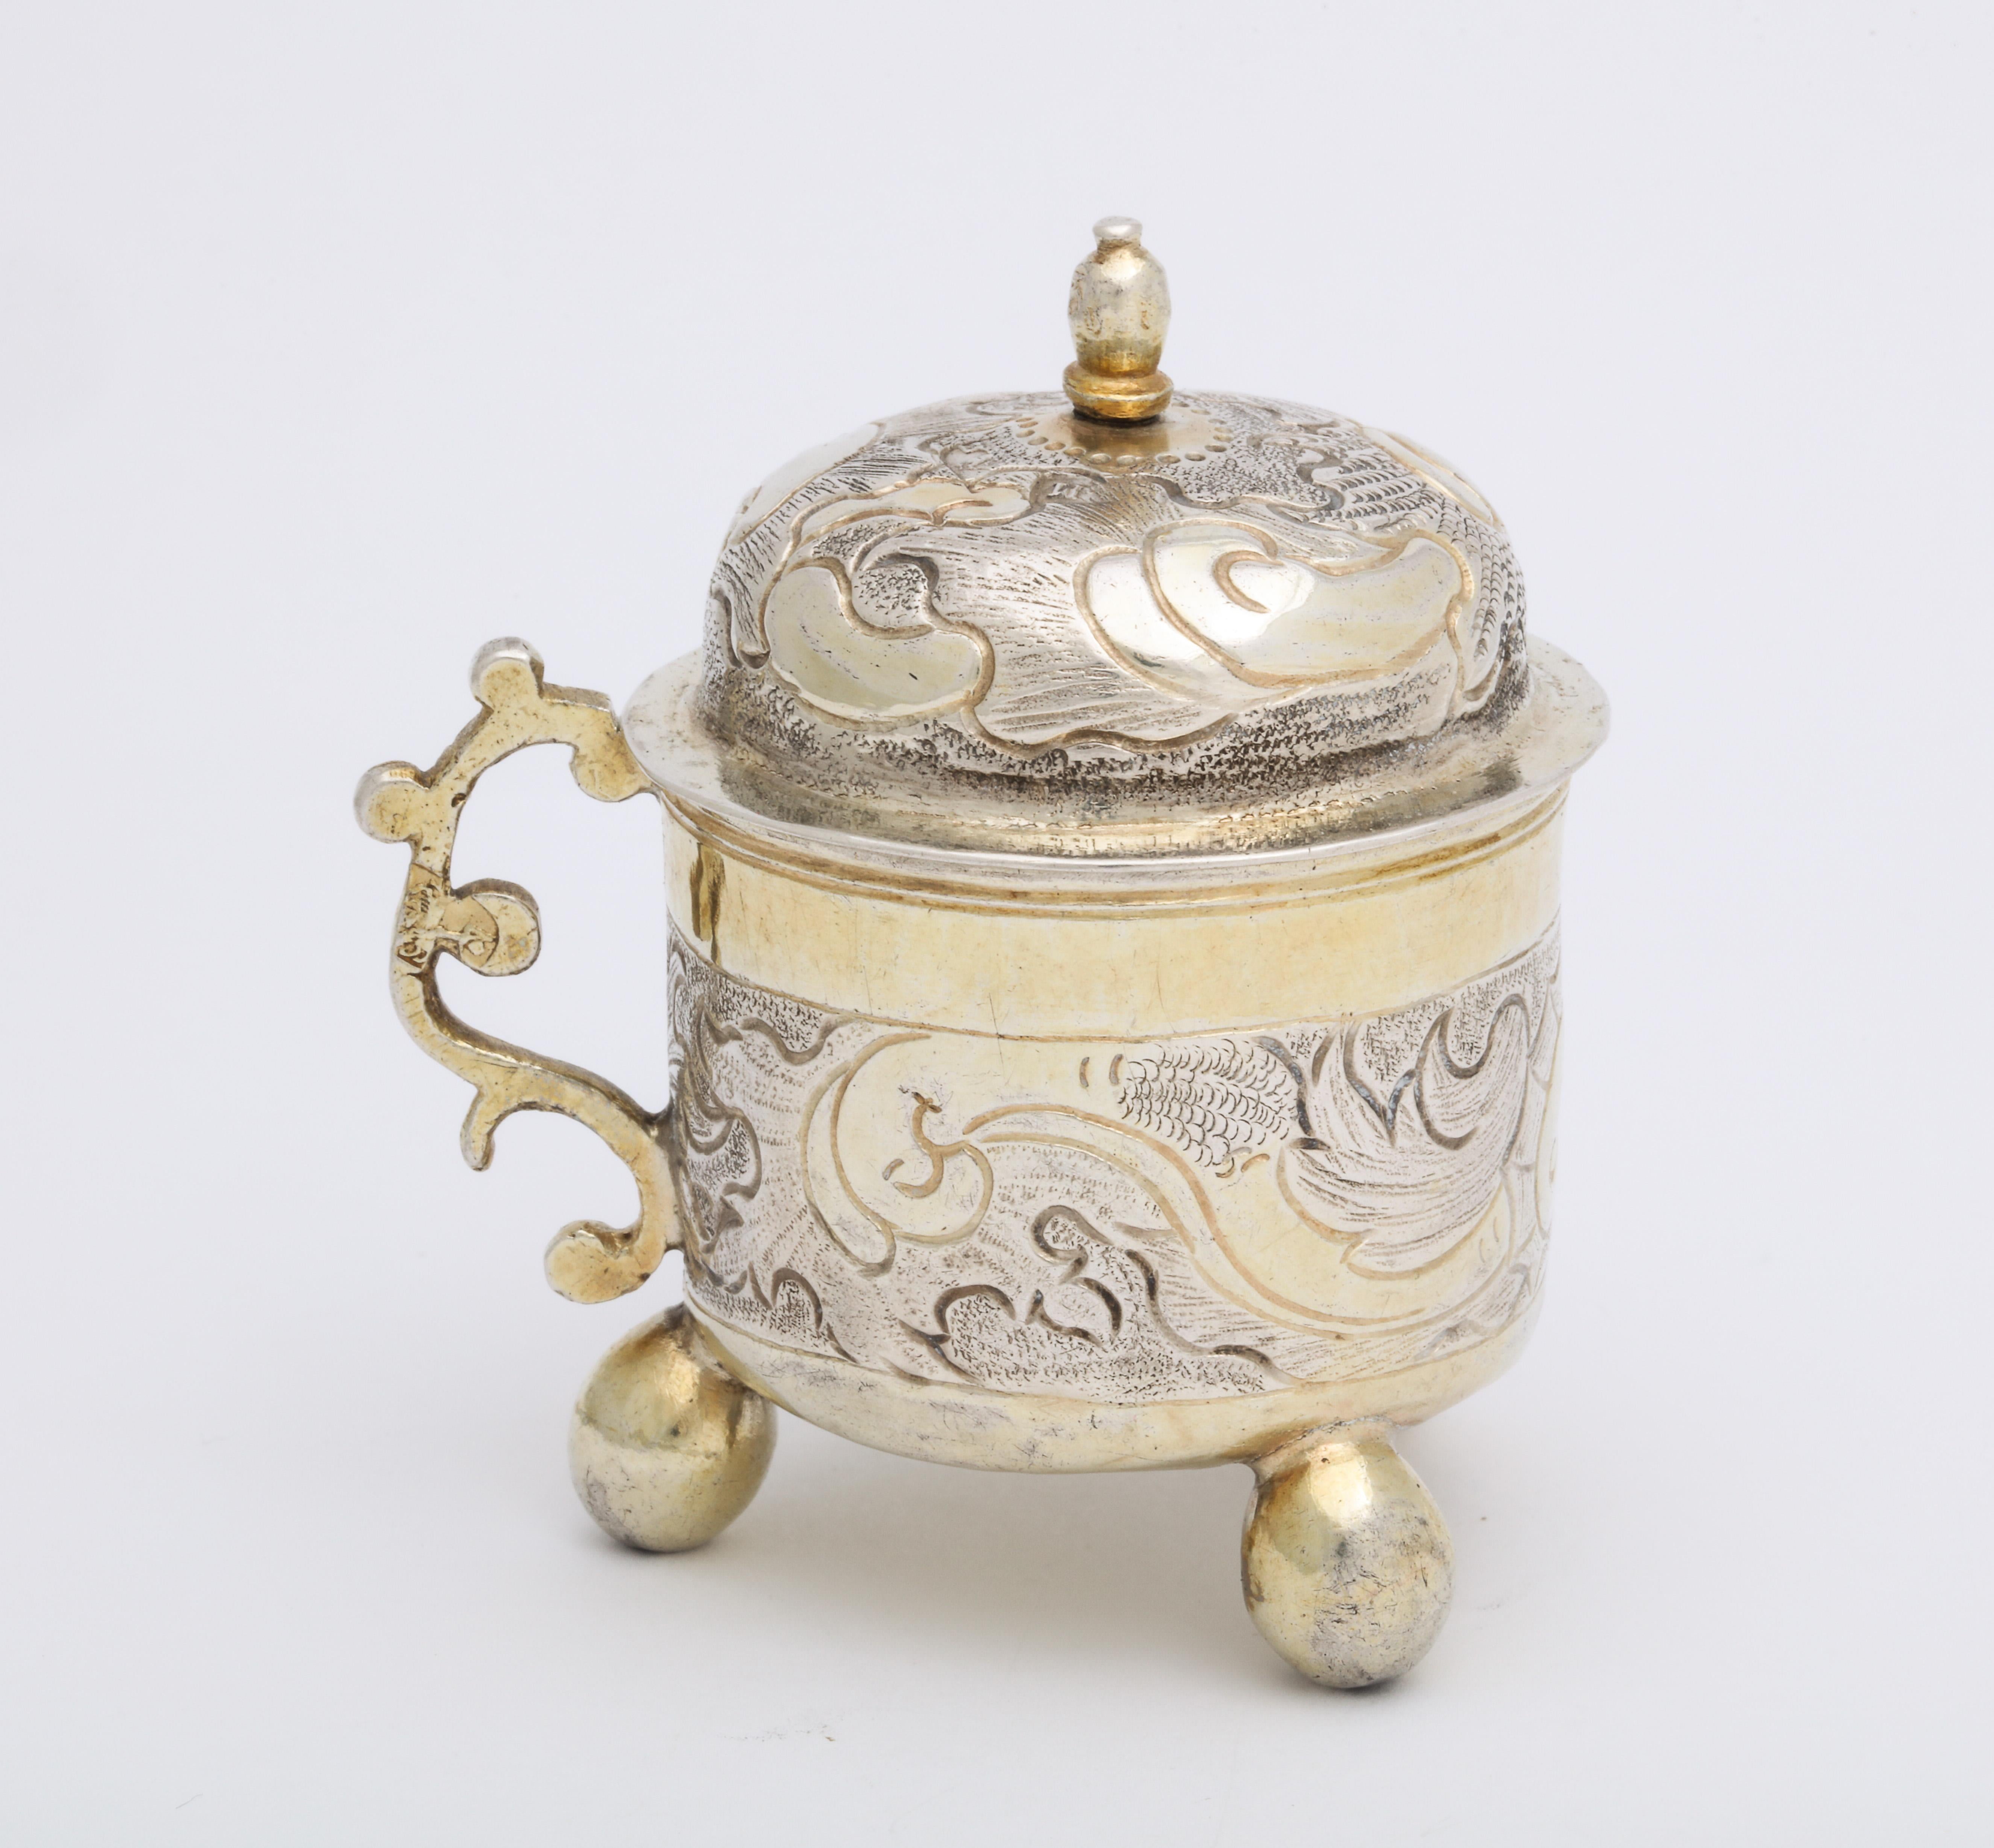 From the reign of Russian Empress Elizabeth Petrovna, the daughter of Peter the Great, this rare mid 18th century silver charka or drinking cup was made Grigorii Serebrianikov in the ancient capital of Moscow. The partially gilded cylindrical cup is